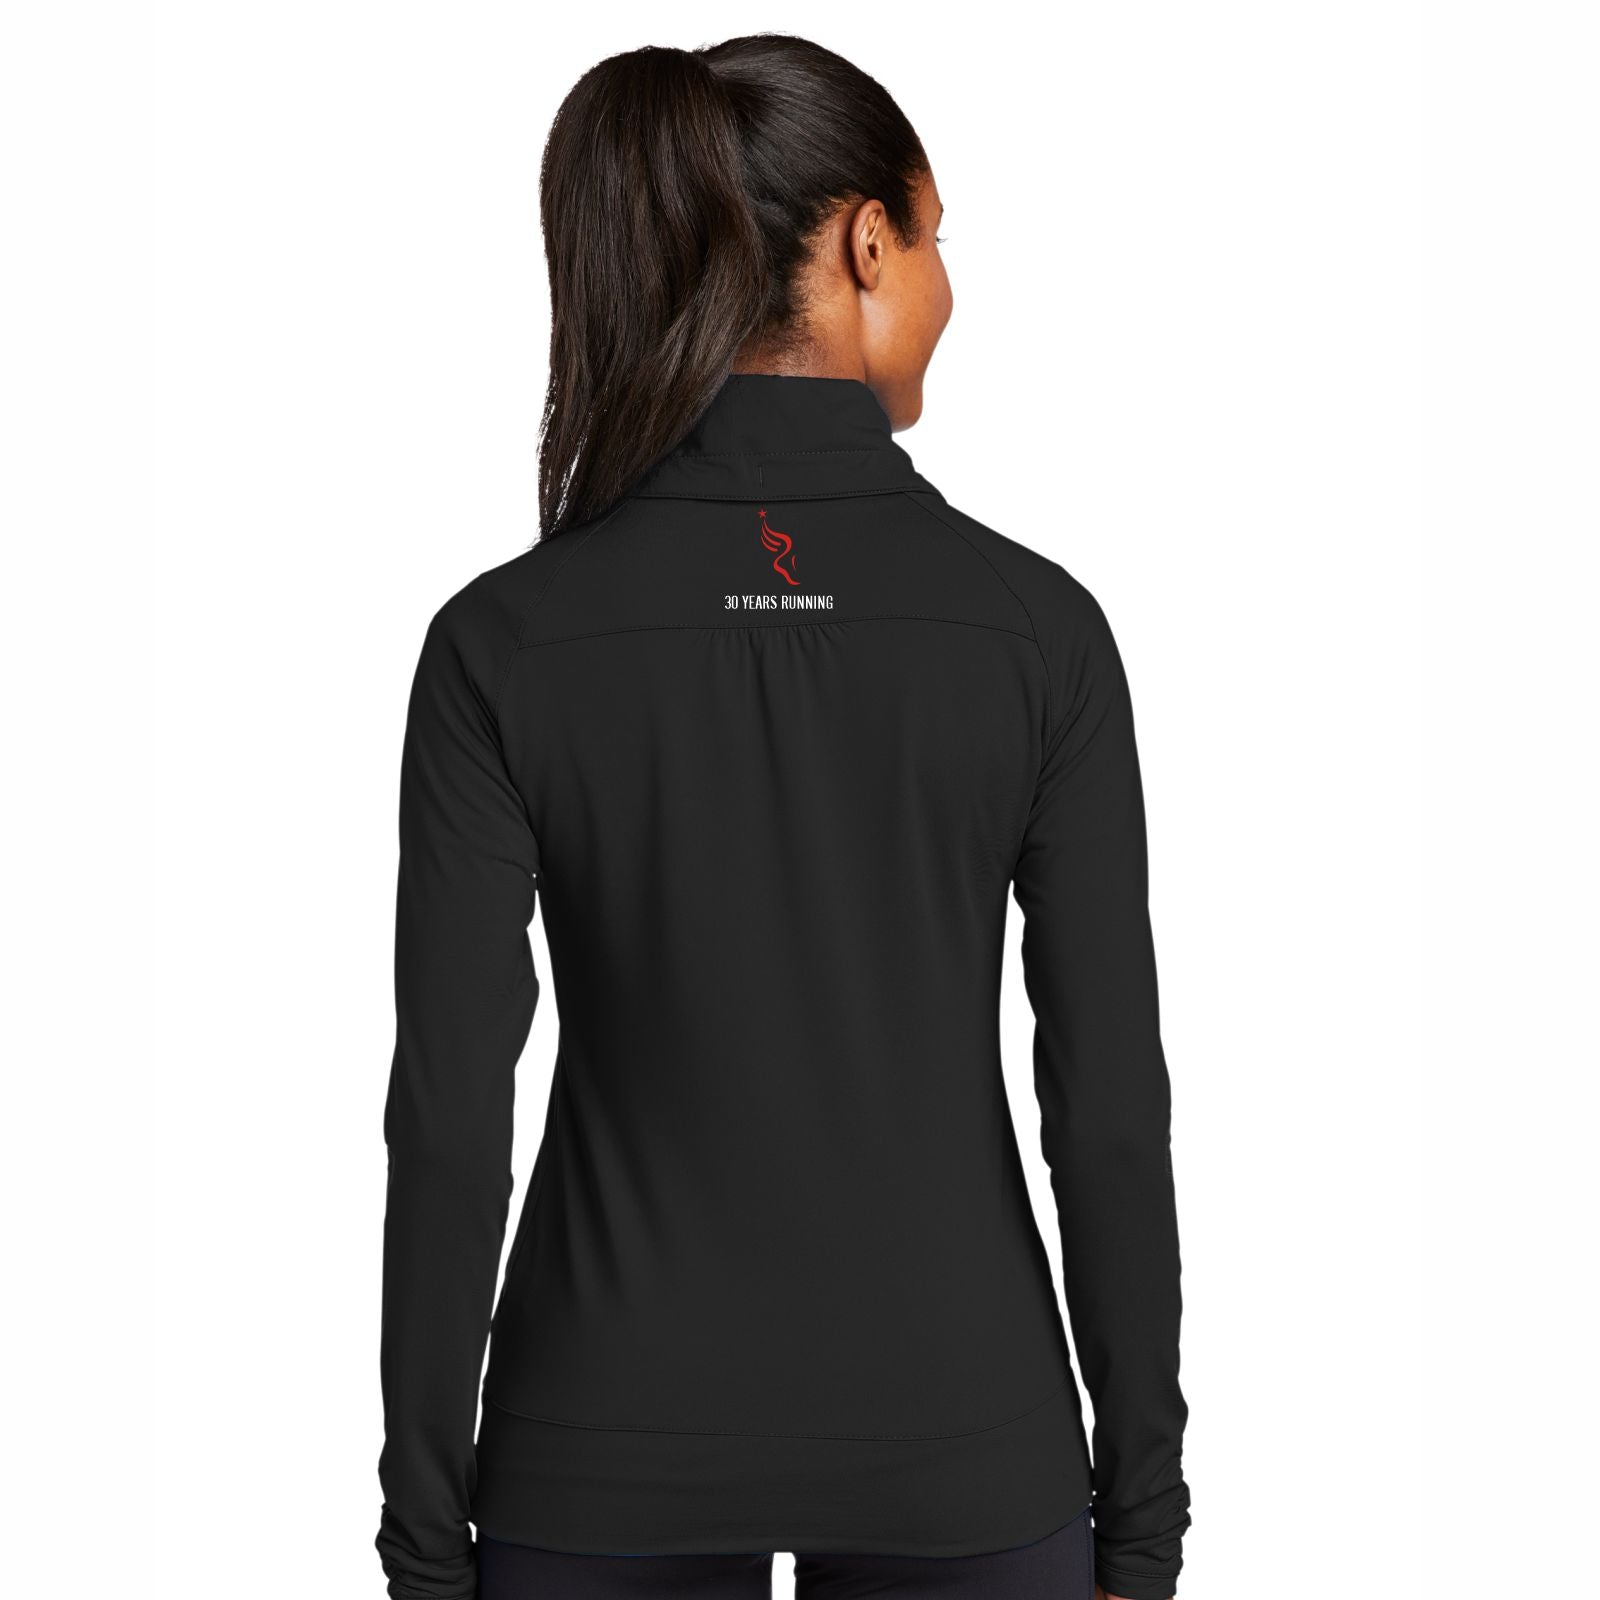 Cowl Jacket -Black- 2023 AACR Finisher Embr. - CUSTOMIZED WITH YOUR TIME